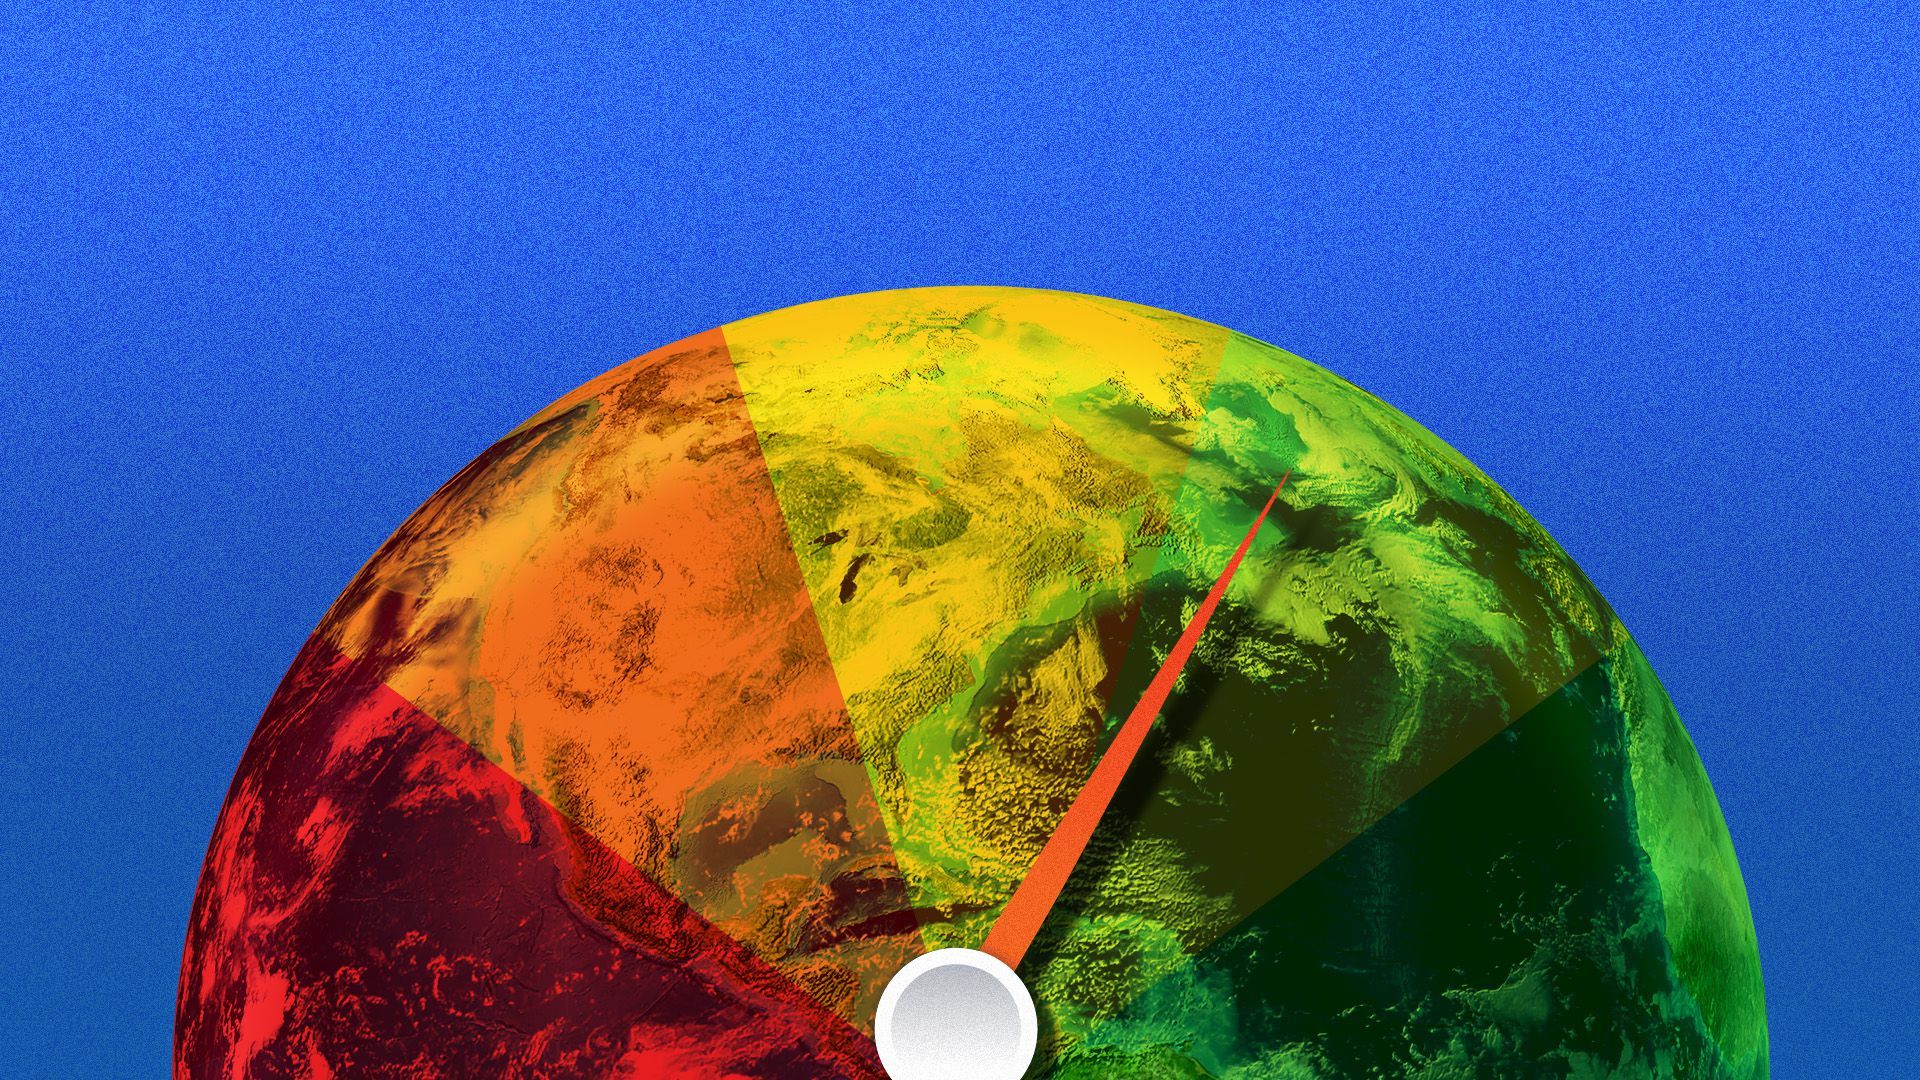 Illustration of the earth as a credit rating meter